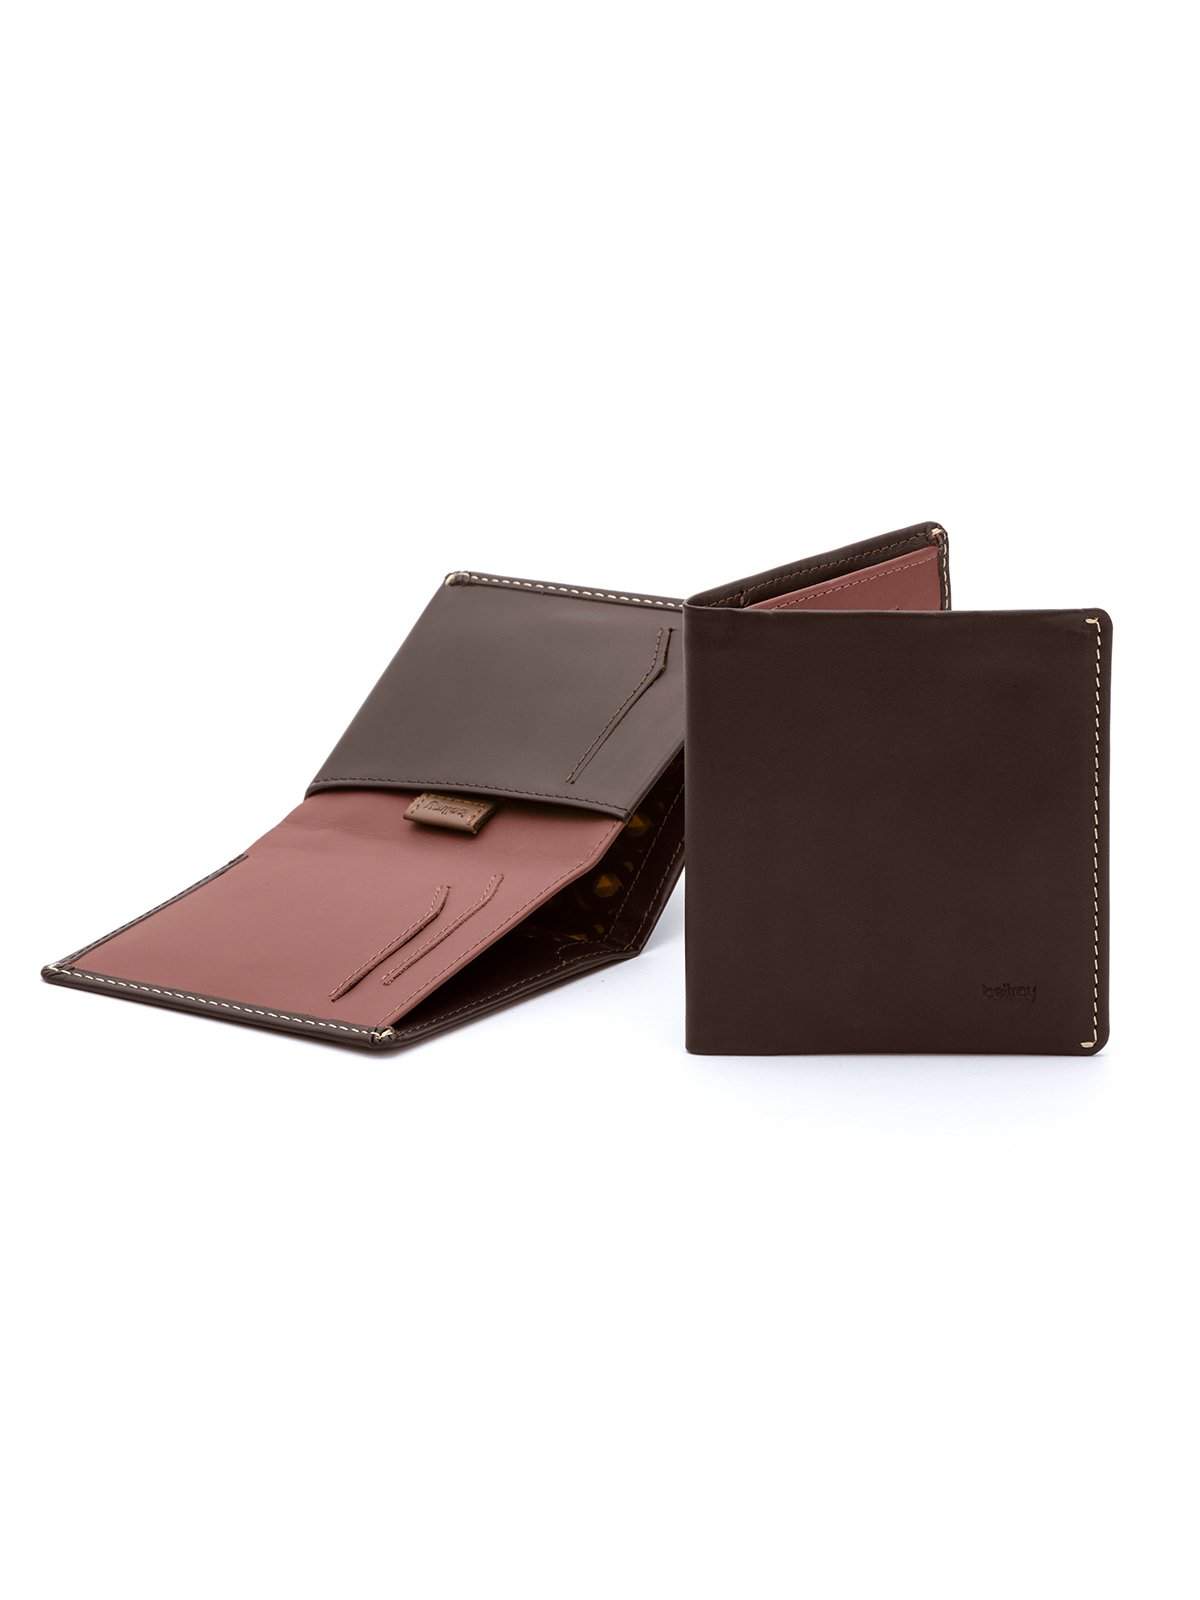 Bellroy Note Sleeve Wallet Java - MORE by Morello Indonesia